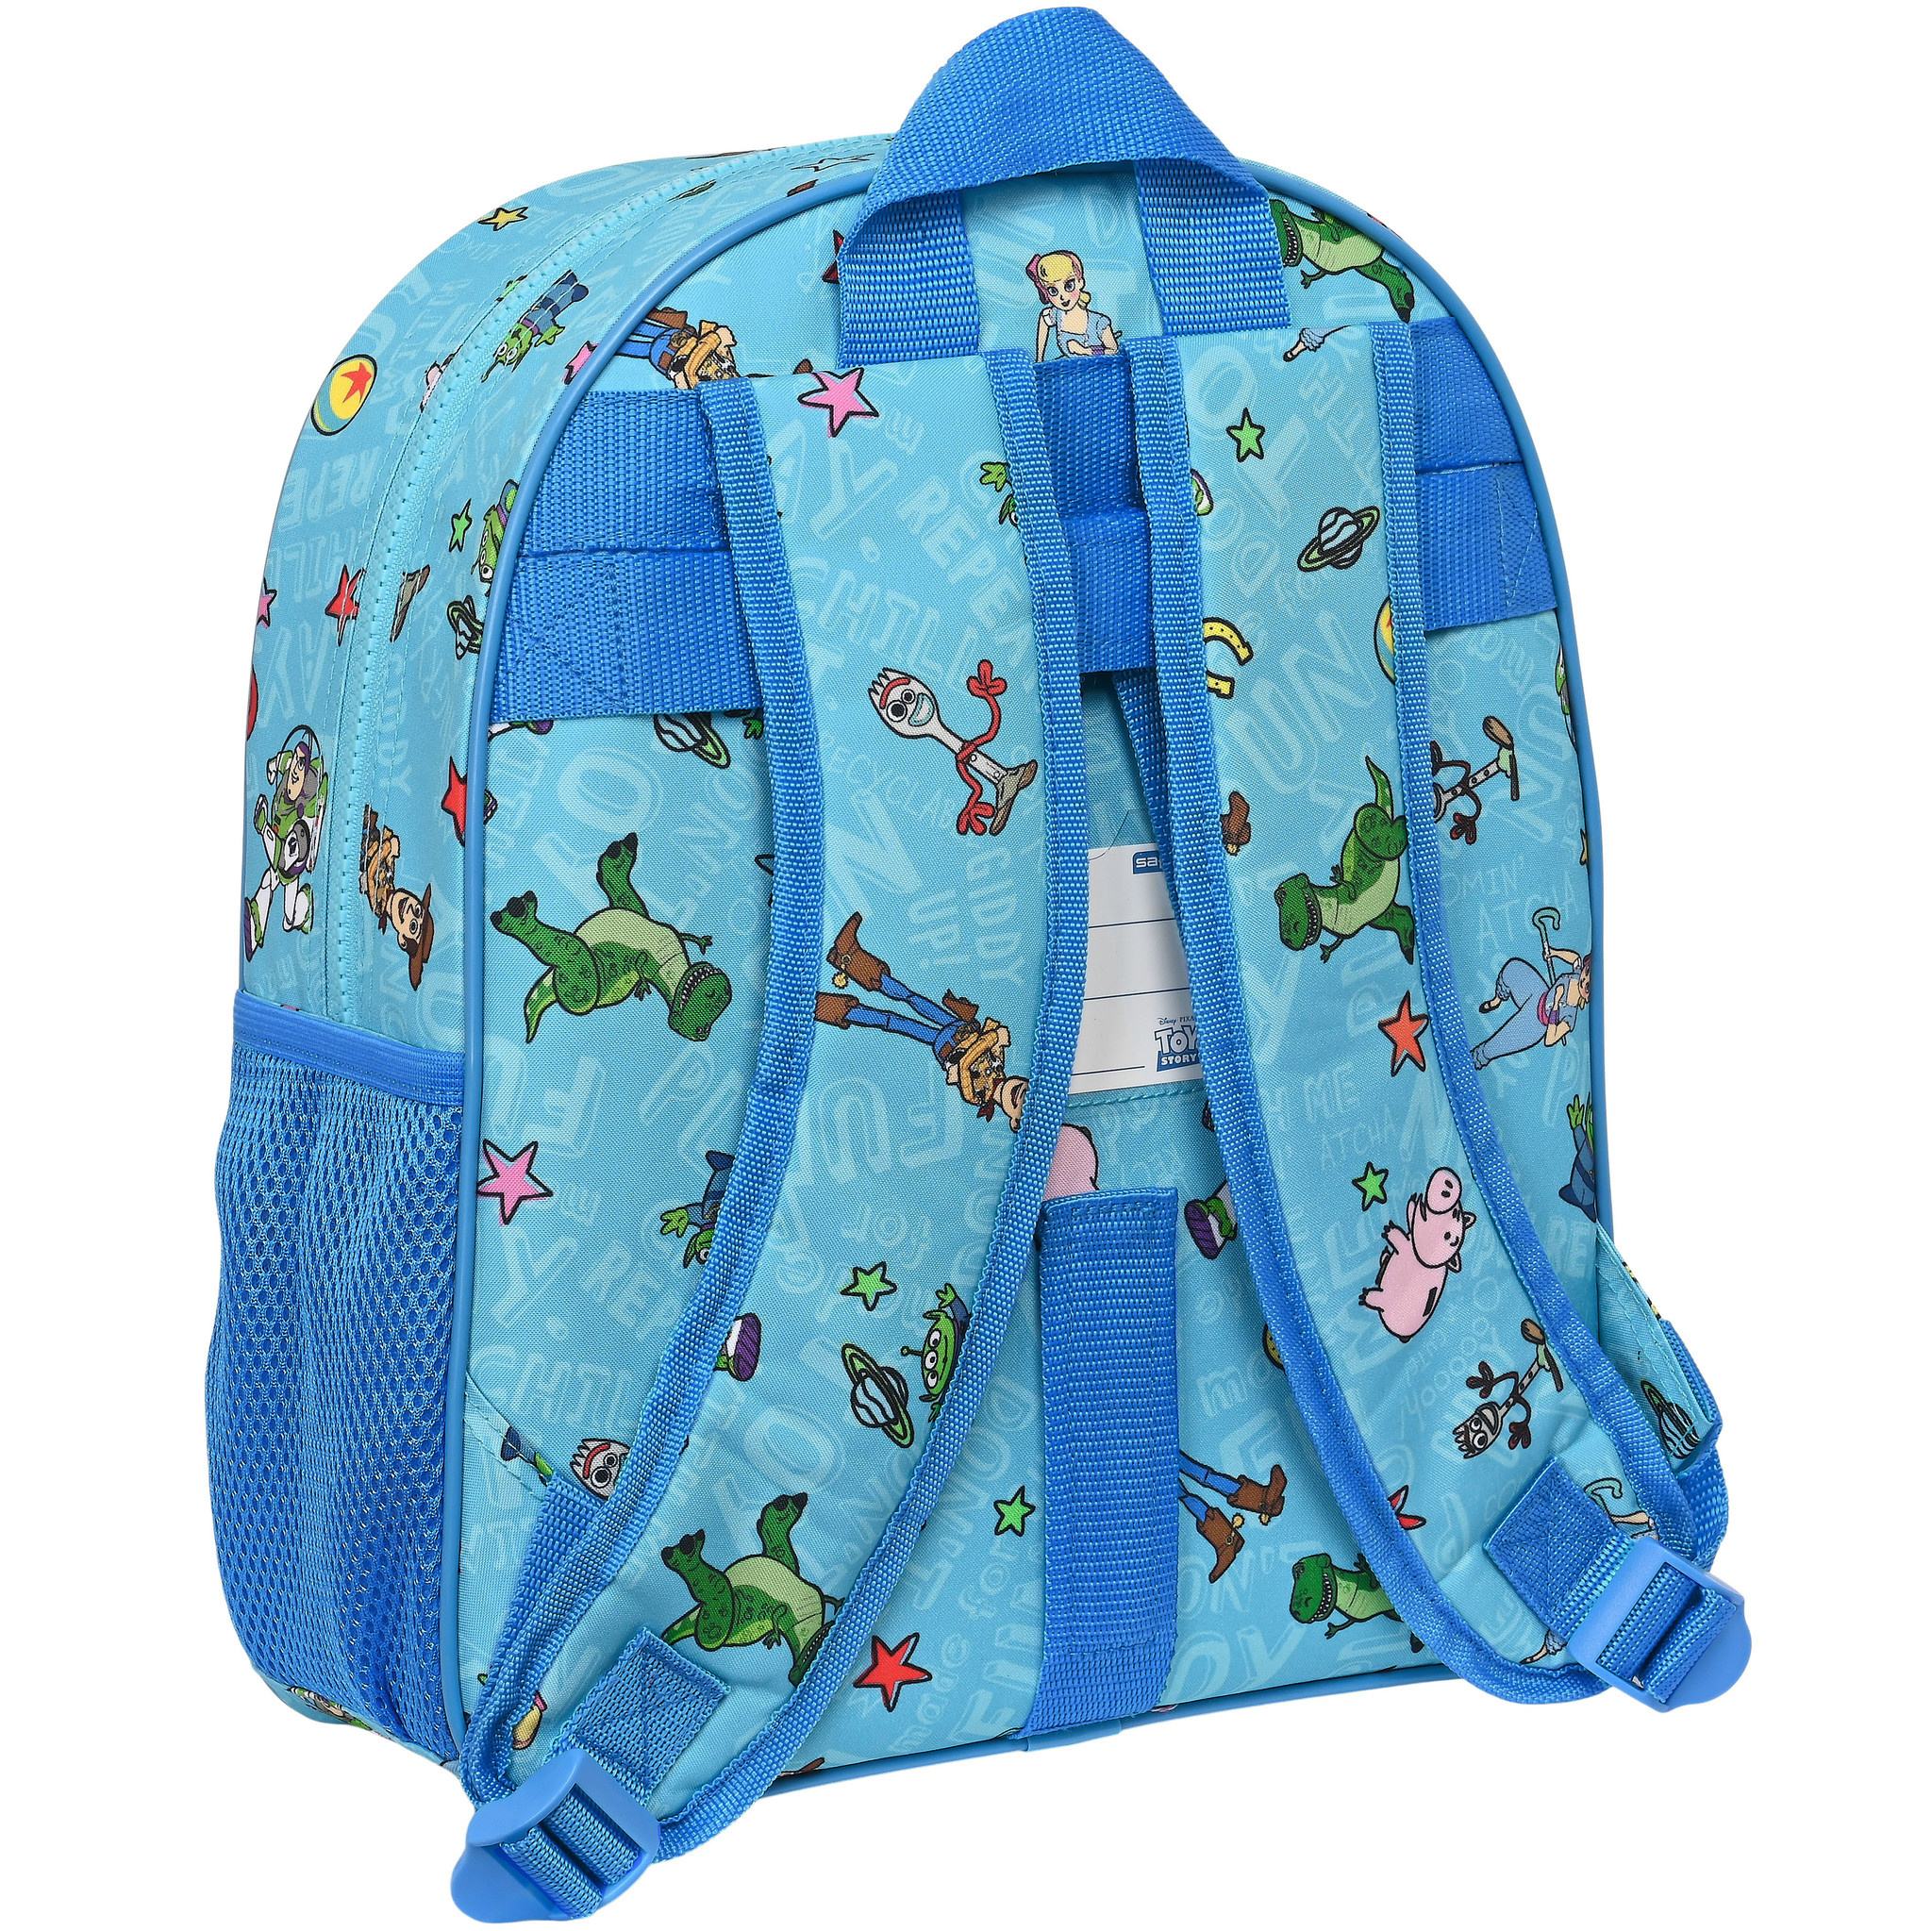 Toy Story Backpack, Ready to Play - 34 x 28 x 10 cm - Polyester